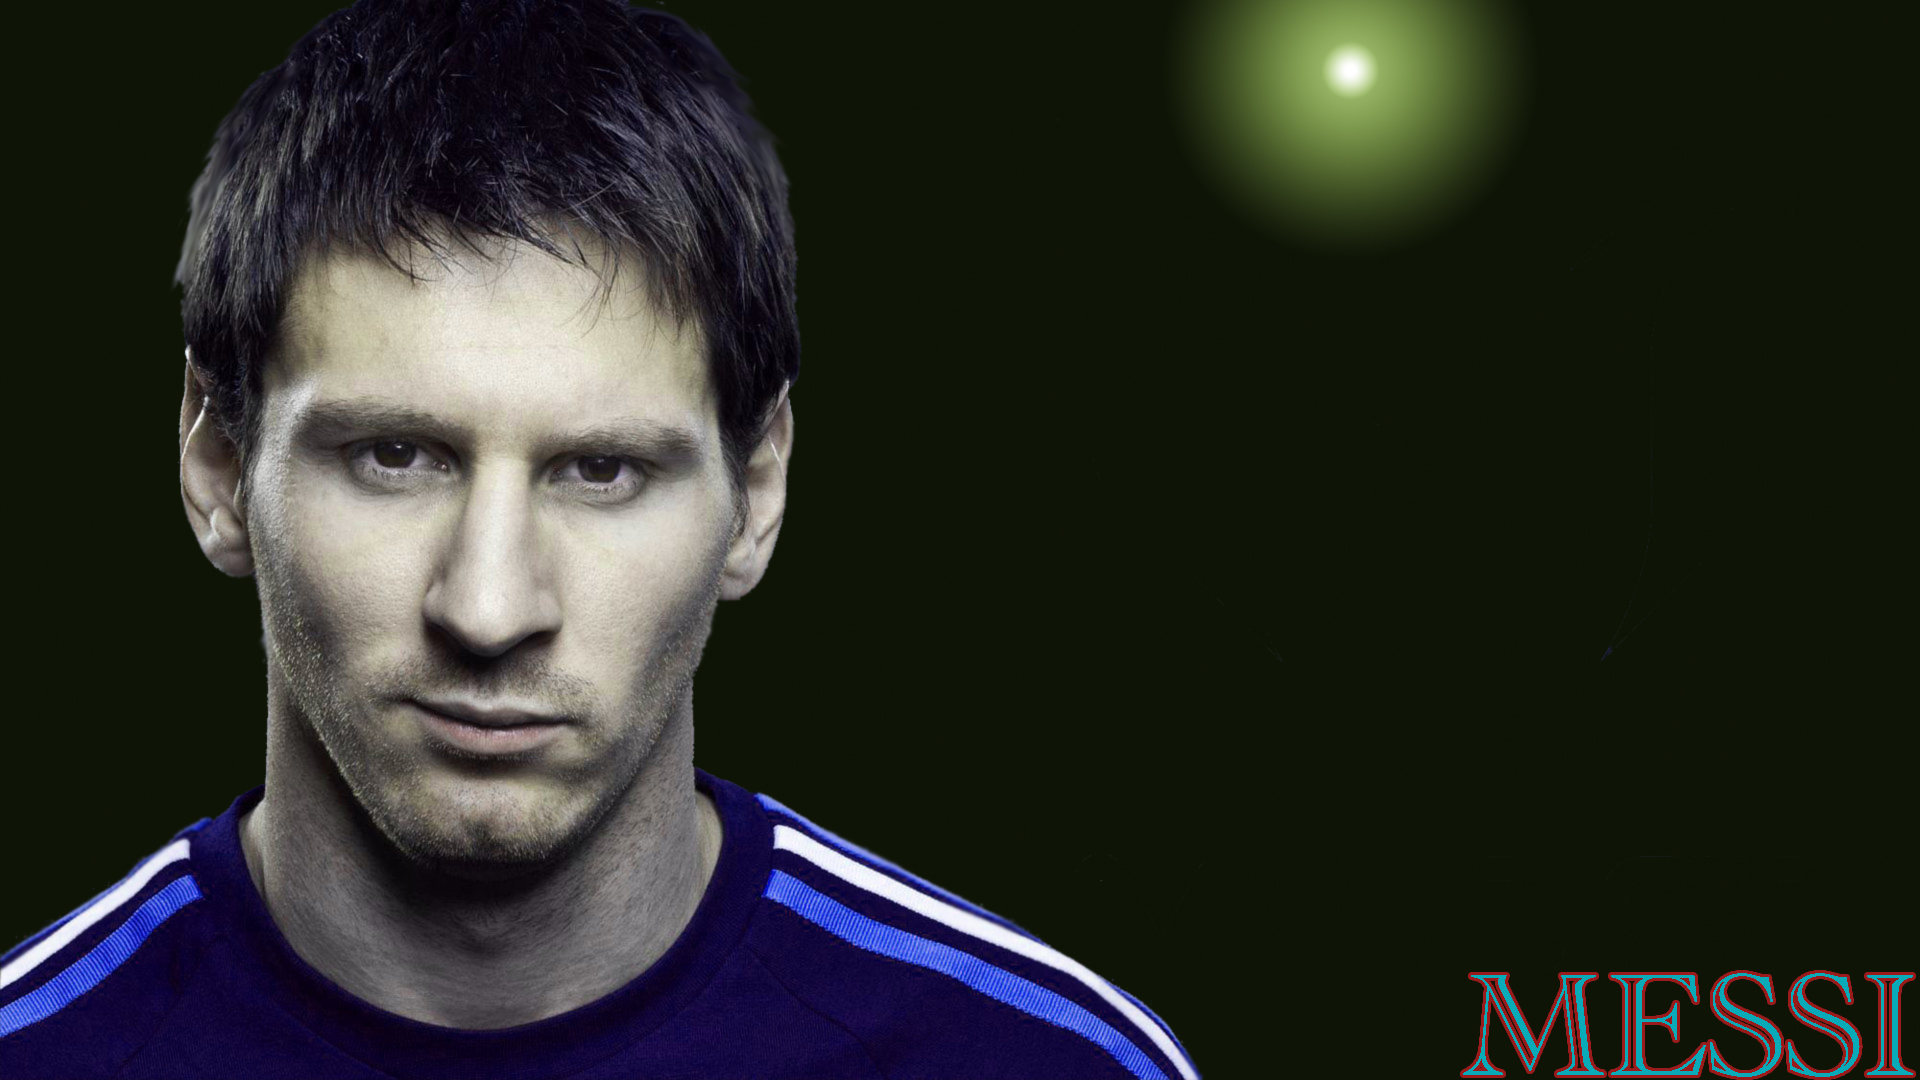 messi-photoshop-edited-wallpapers-picture